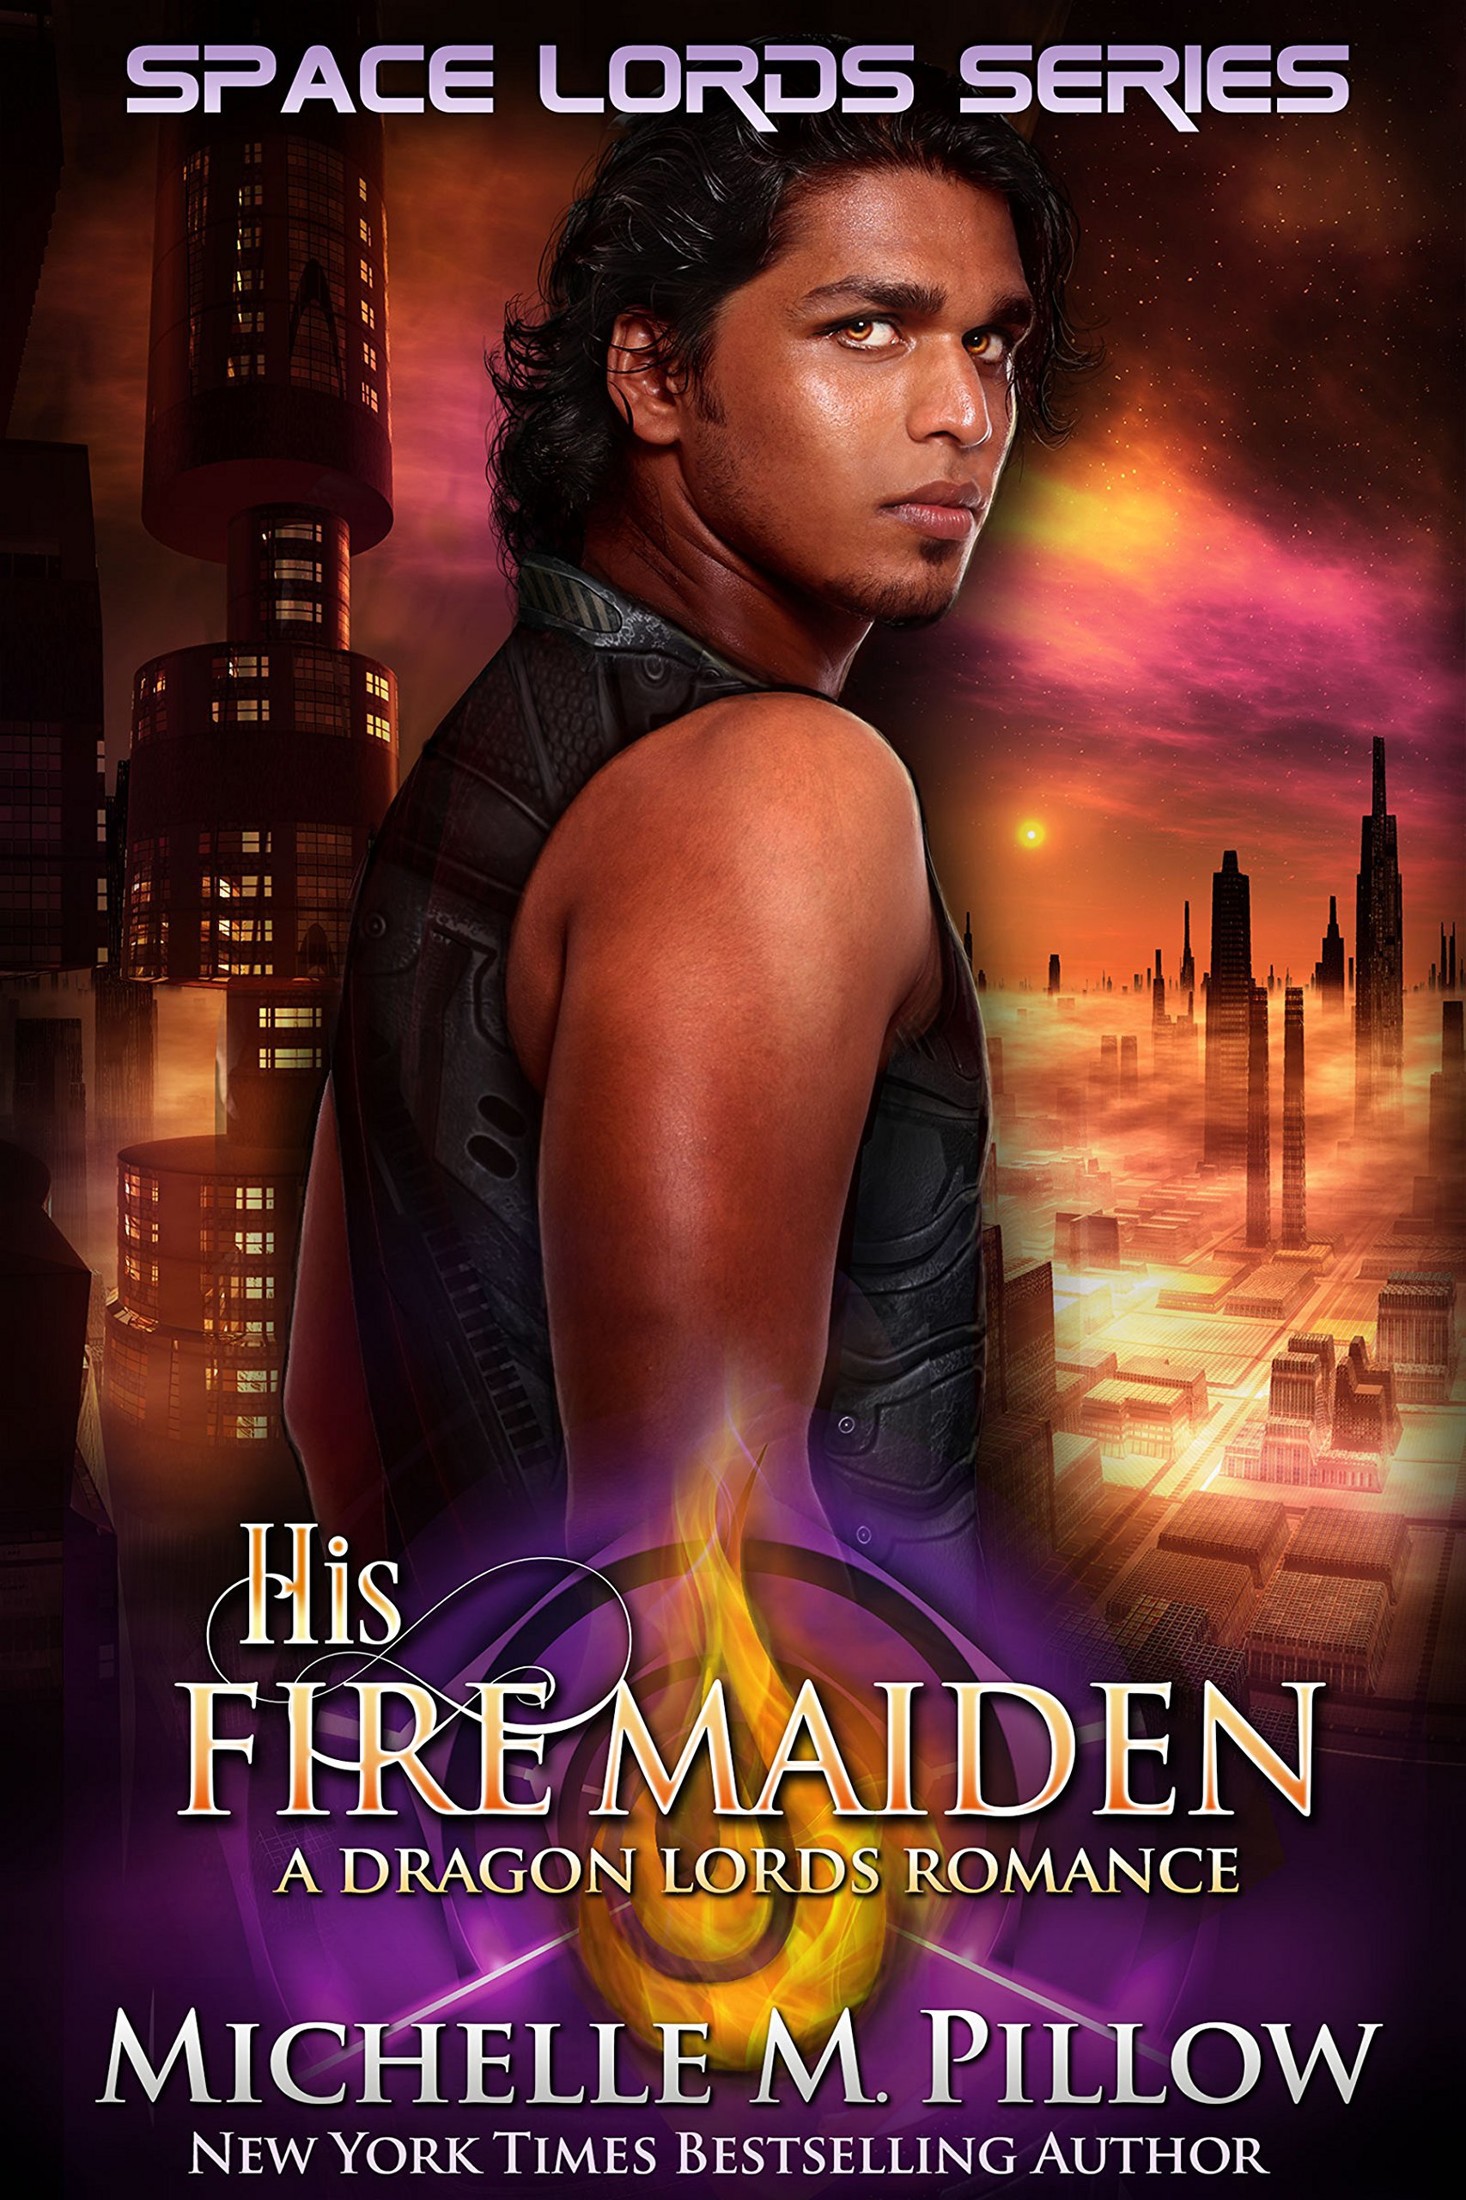 His Fire Maiden by Michelle M. Pillow